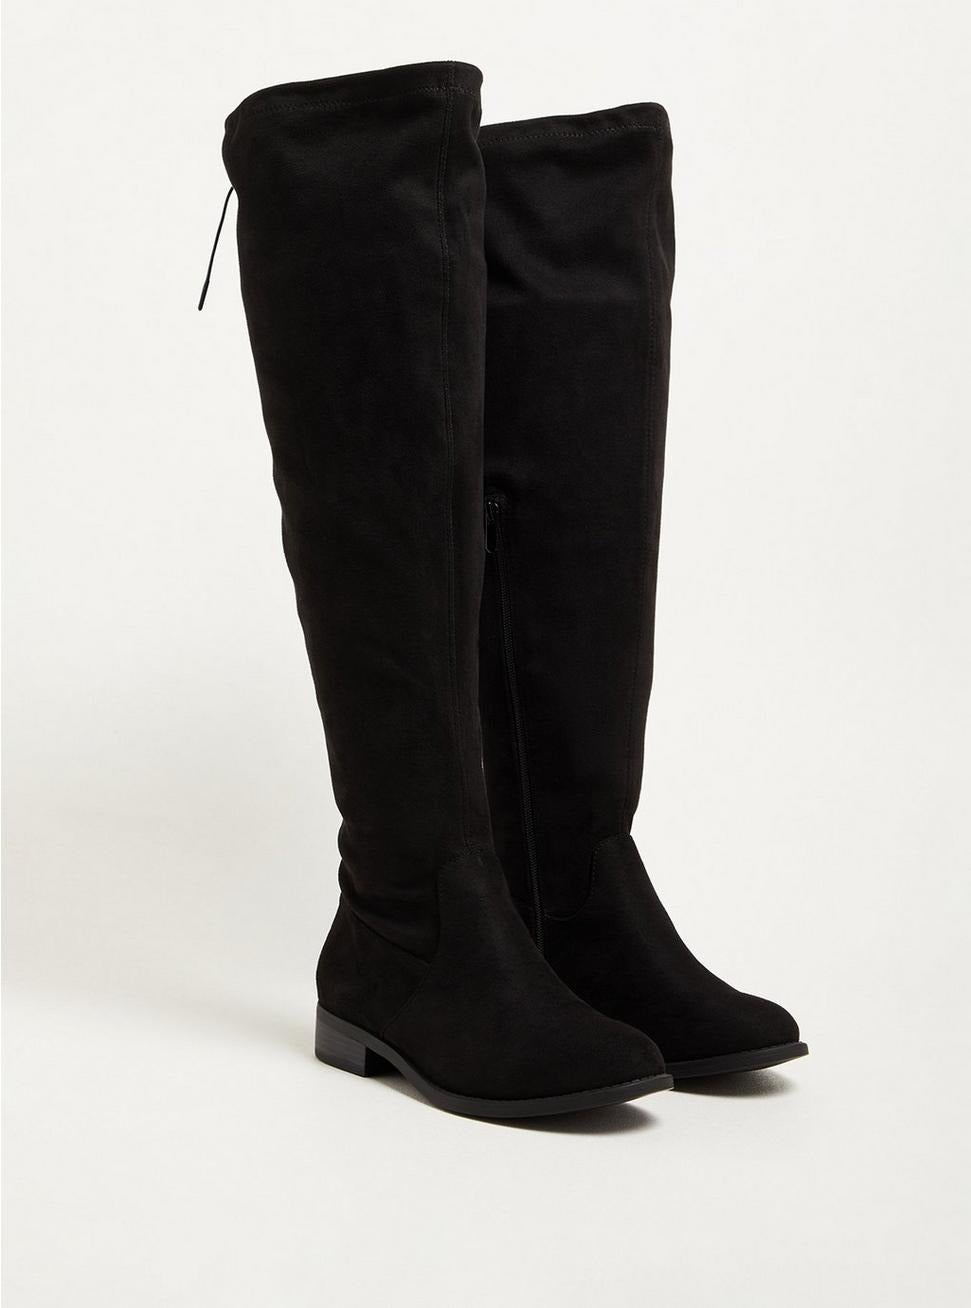 the black over-the-knee boots